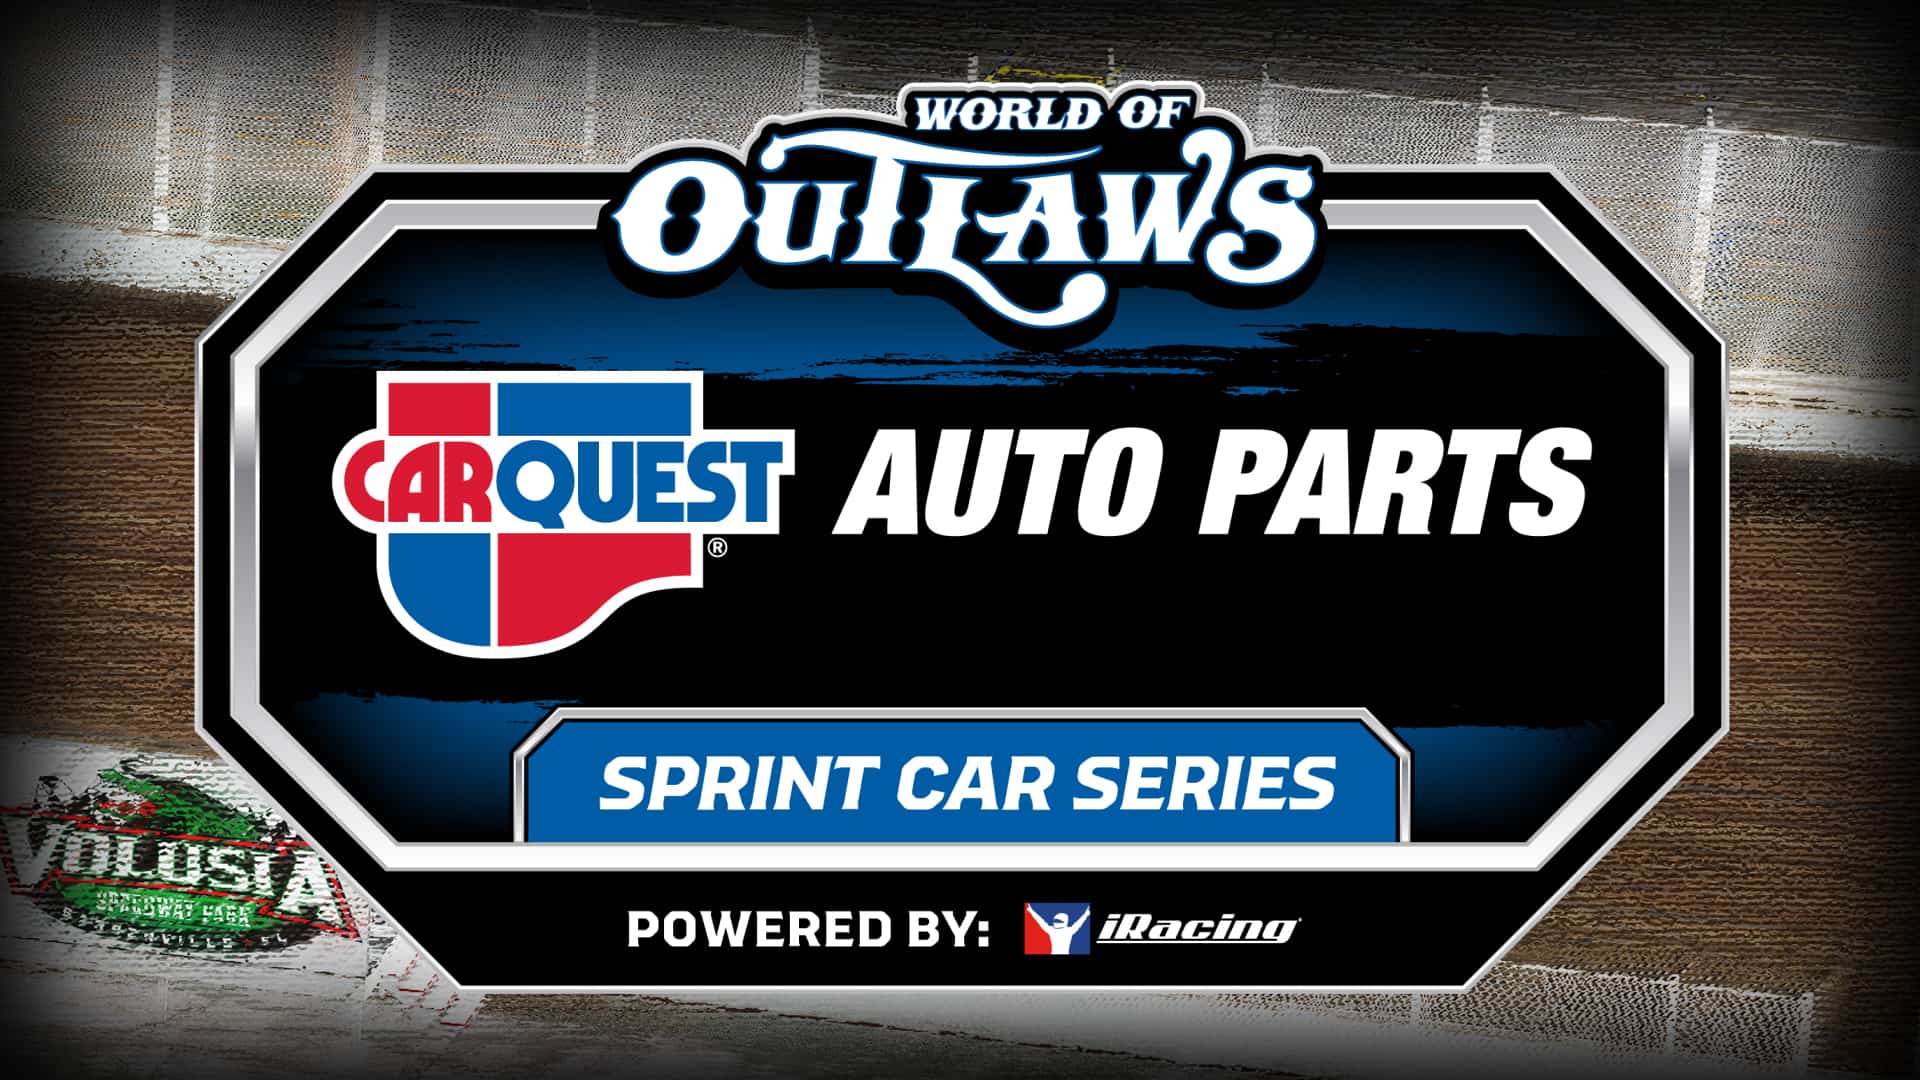 2022-23 iRacing World of Outlaws Sprint Car Series begins tonight